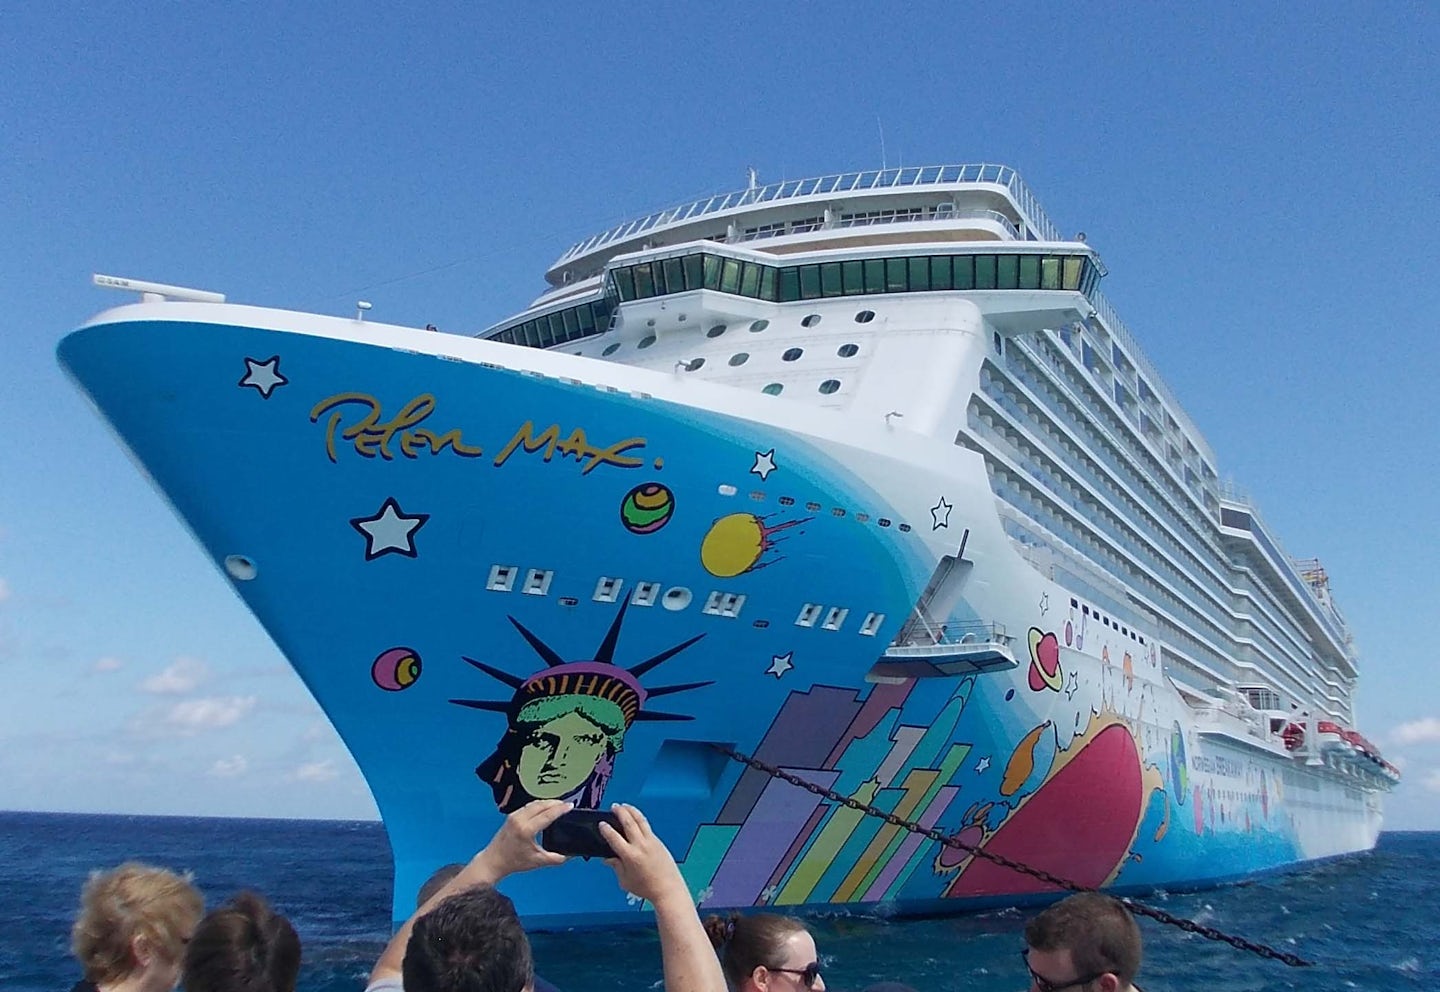 Norwegian Breakaway from the NCL private island - Great Stirrup Cay.